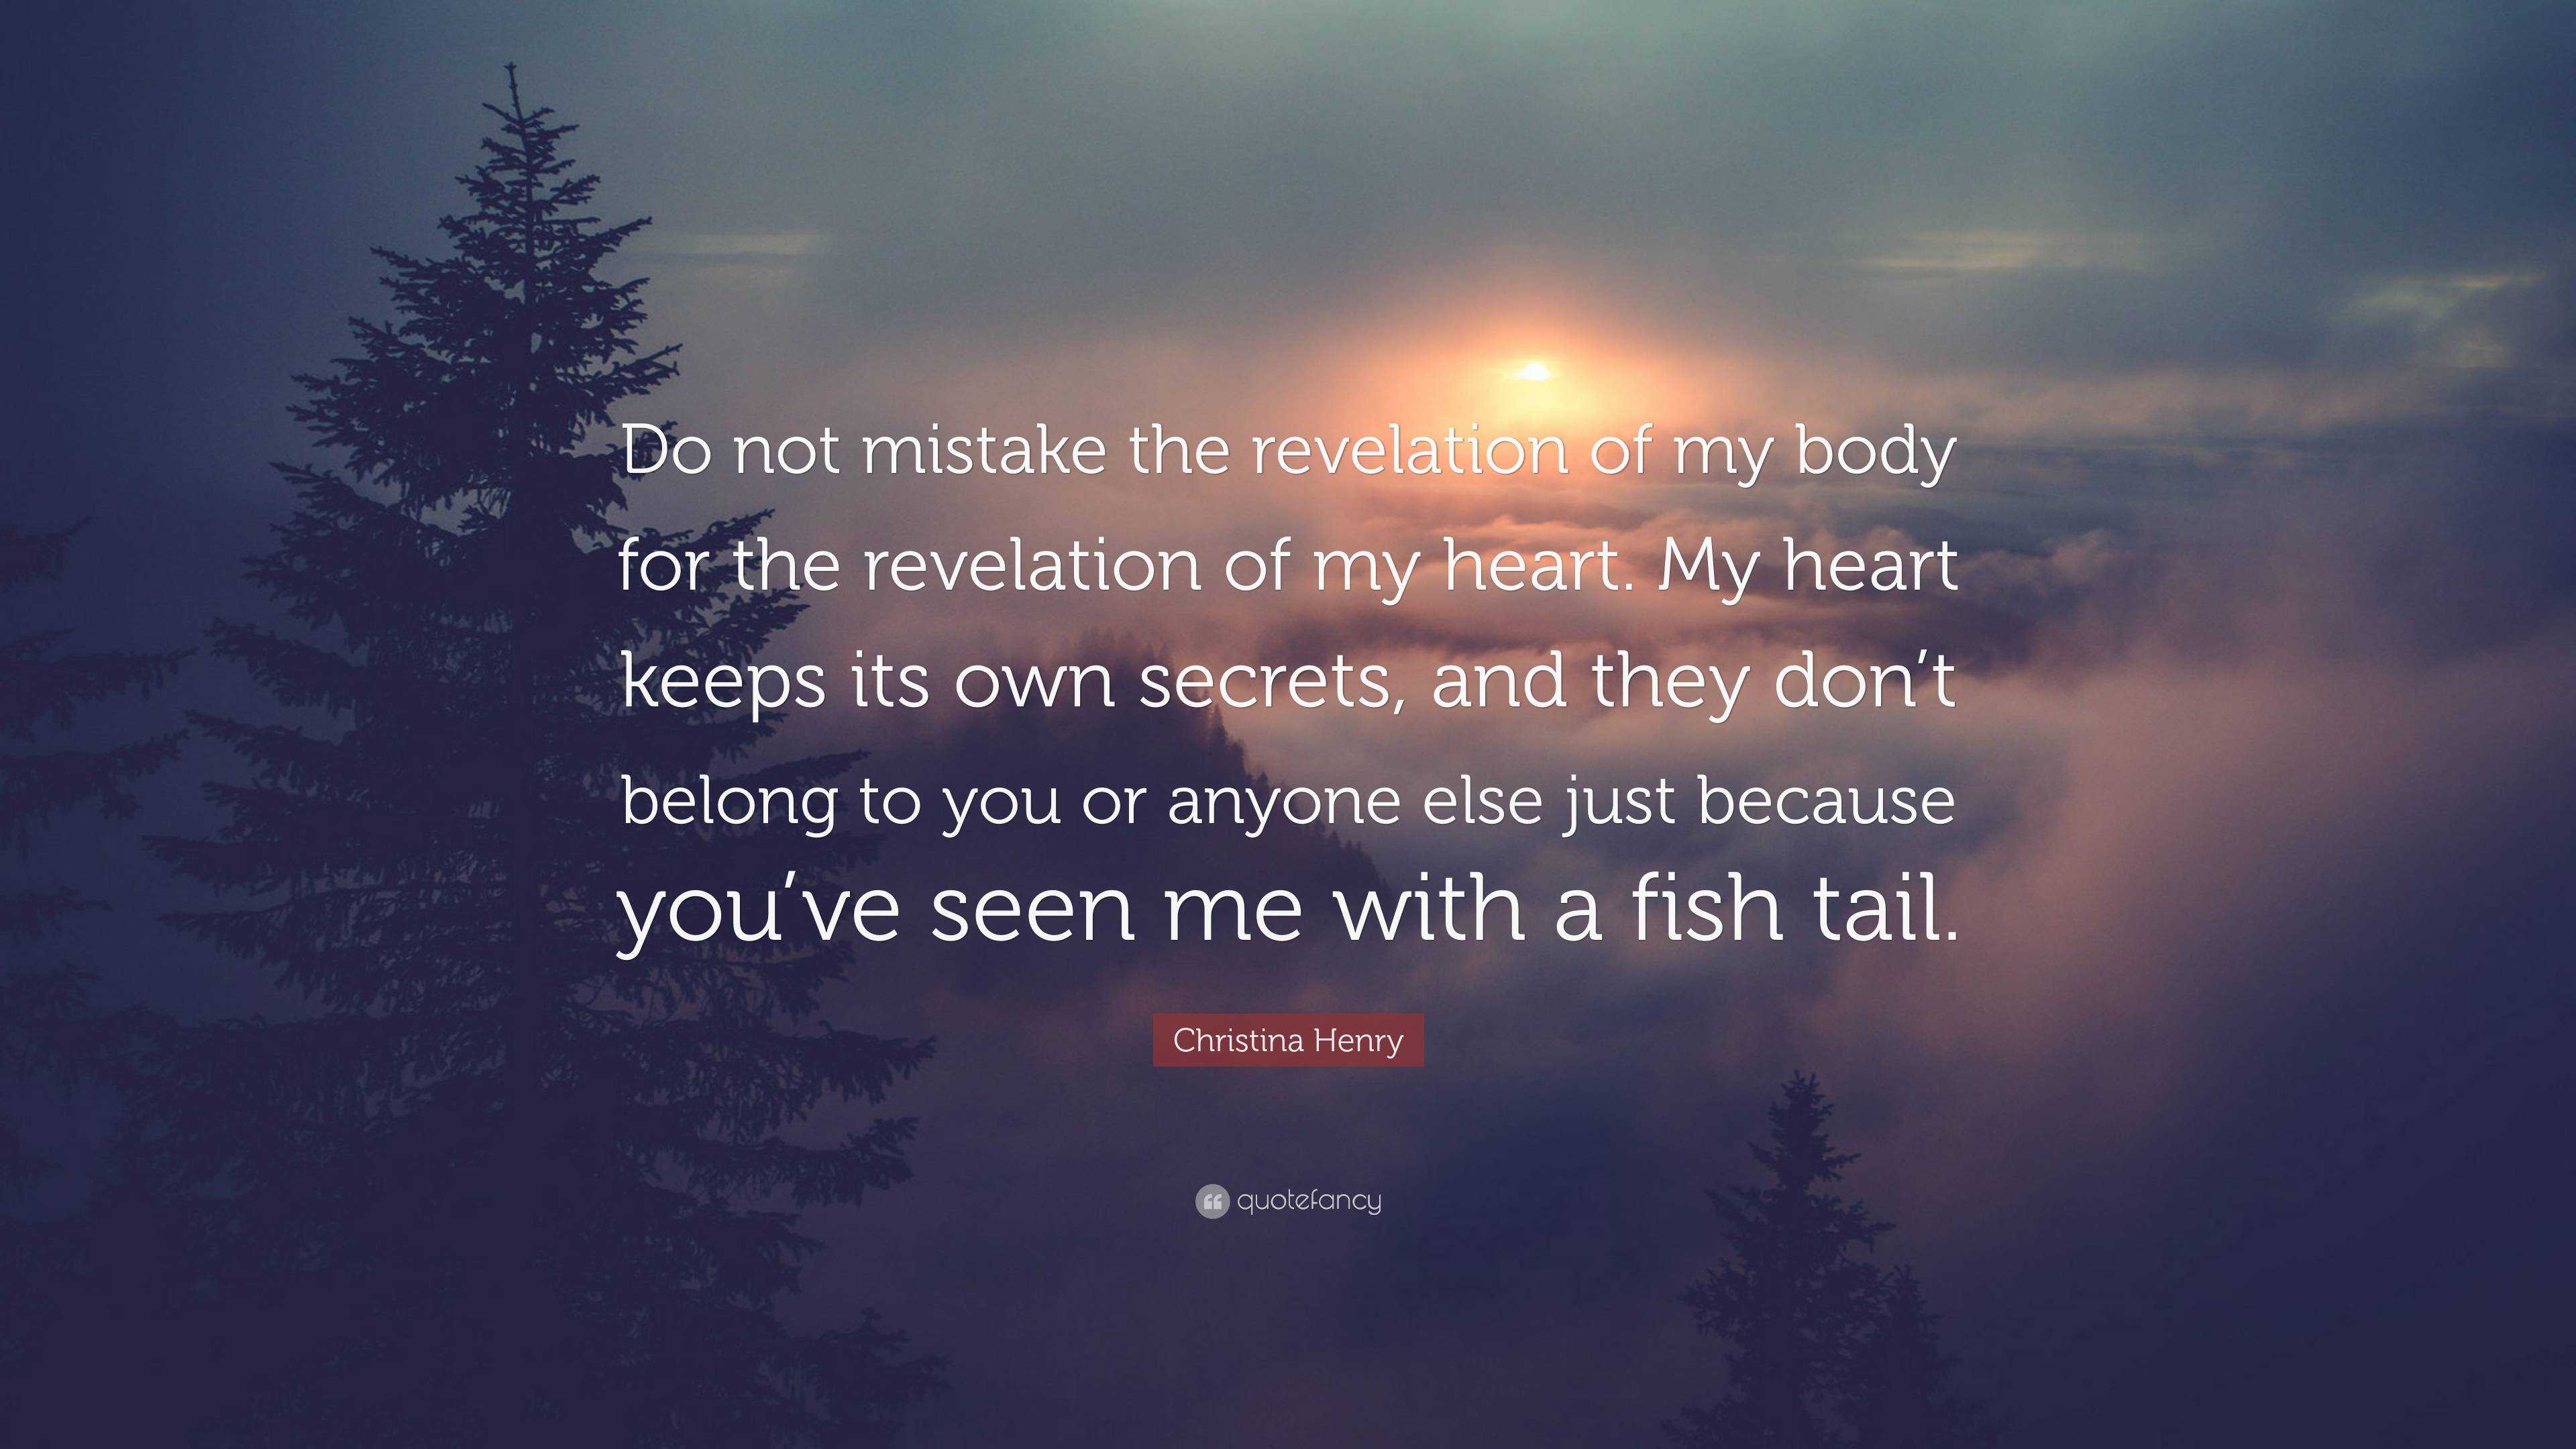 Christina Henry Quote: “Do not mistake the revelation of my body for the  revelation of my heart. My heart keeps its own secrets, and they don't ”